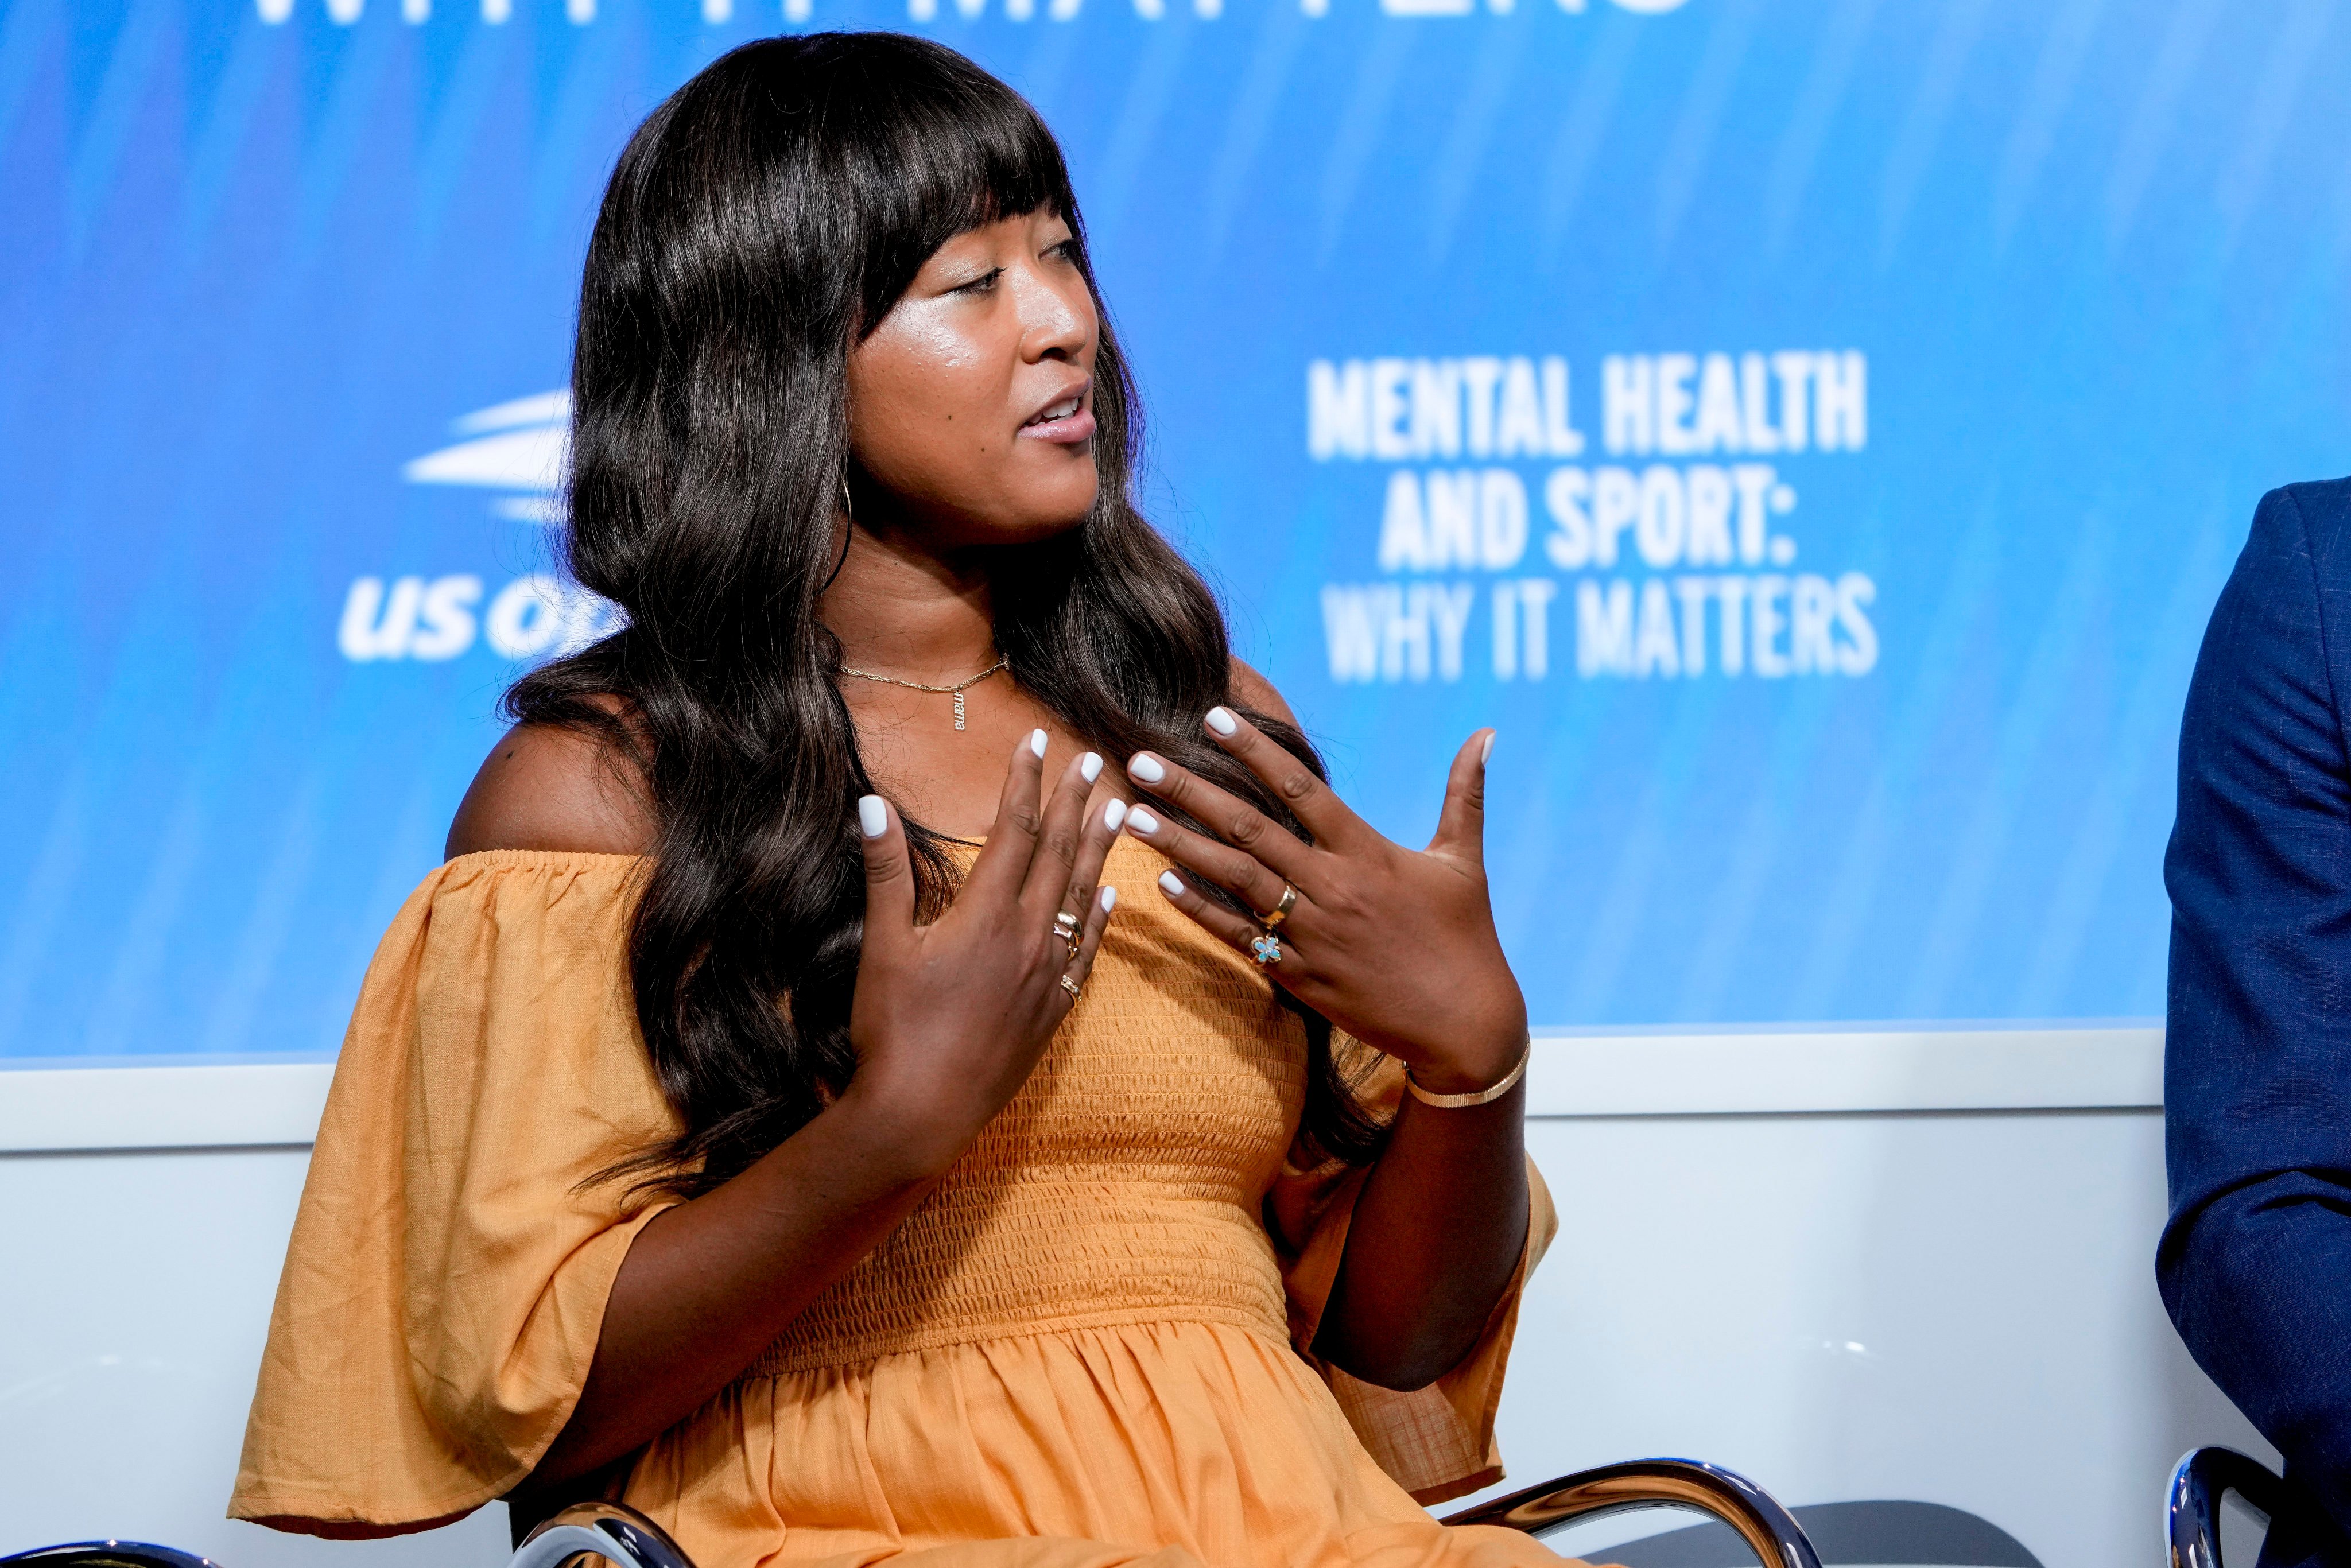 Naomi Osaka speaks during a forum on mental health during the US Open tennis championships in New York. Photo: AP